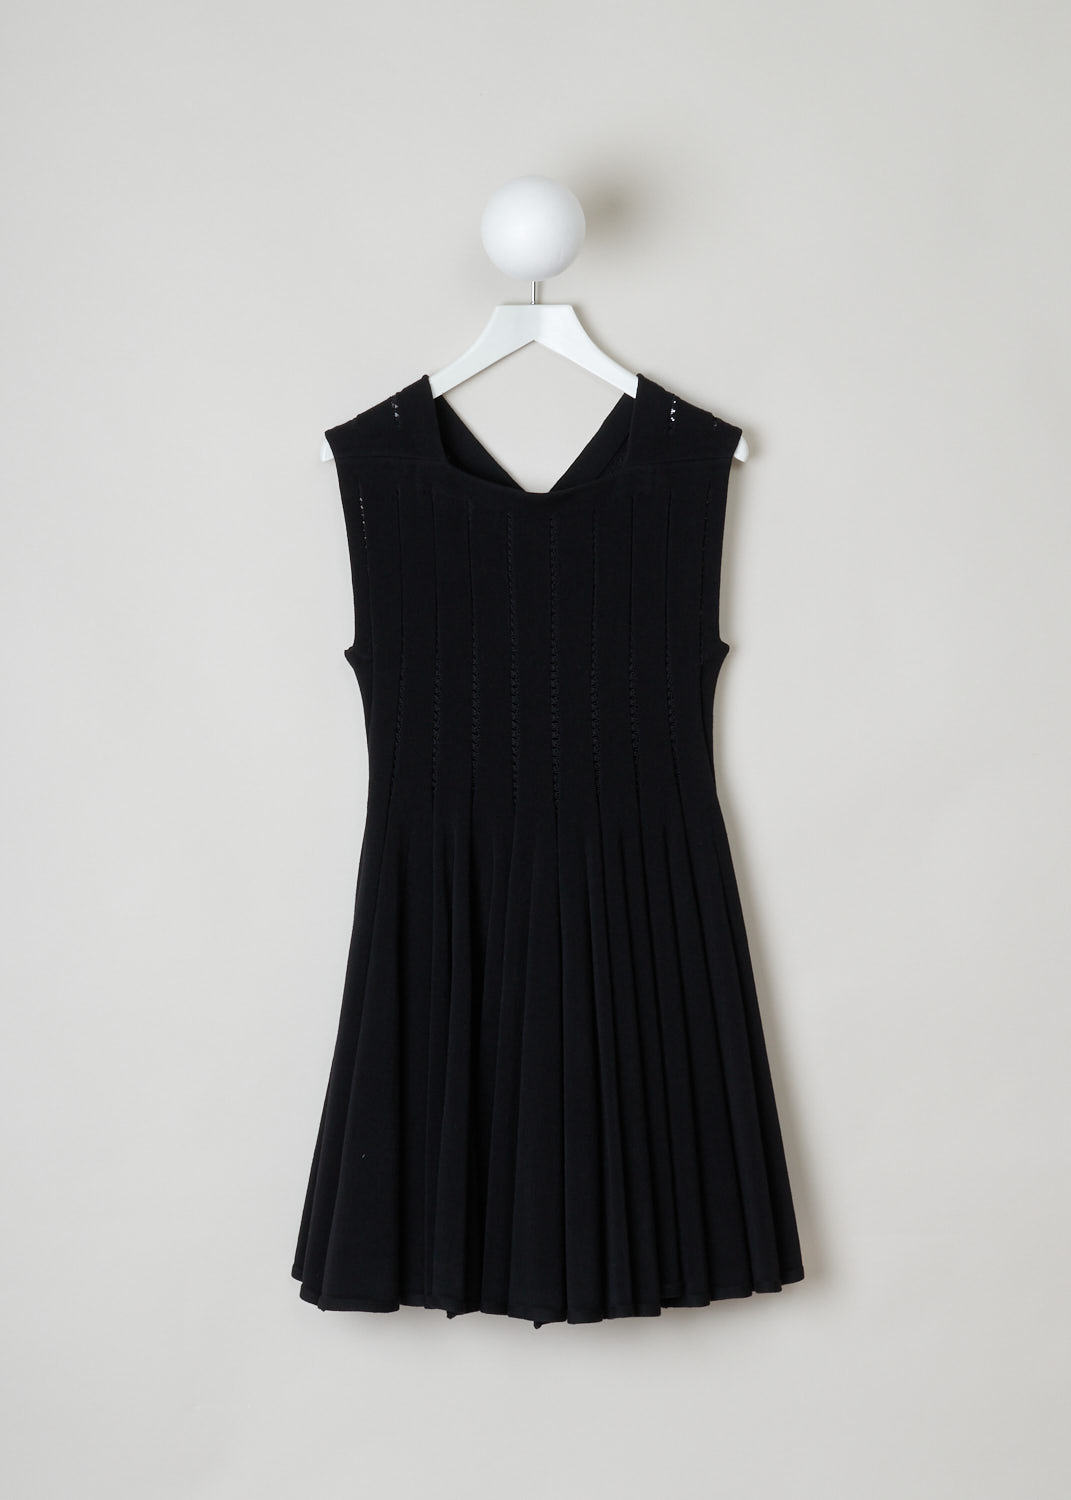 AlaÃ¯a, Black babydoll dress with embroidered detailing, 4W9RB20CM120_baby_doll_SM_noir_C999, black, front, Black babydoll dress featuring a square cut neckline on the front and a v-shape on the back. The top of this dress is put together in strips of fabric held together by the black embroidery. The skirt of this model is designed with knife pleats and will flare out. The length of this model is thigh-height. Your fastening option on this model is the concealed zipper on the back.  